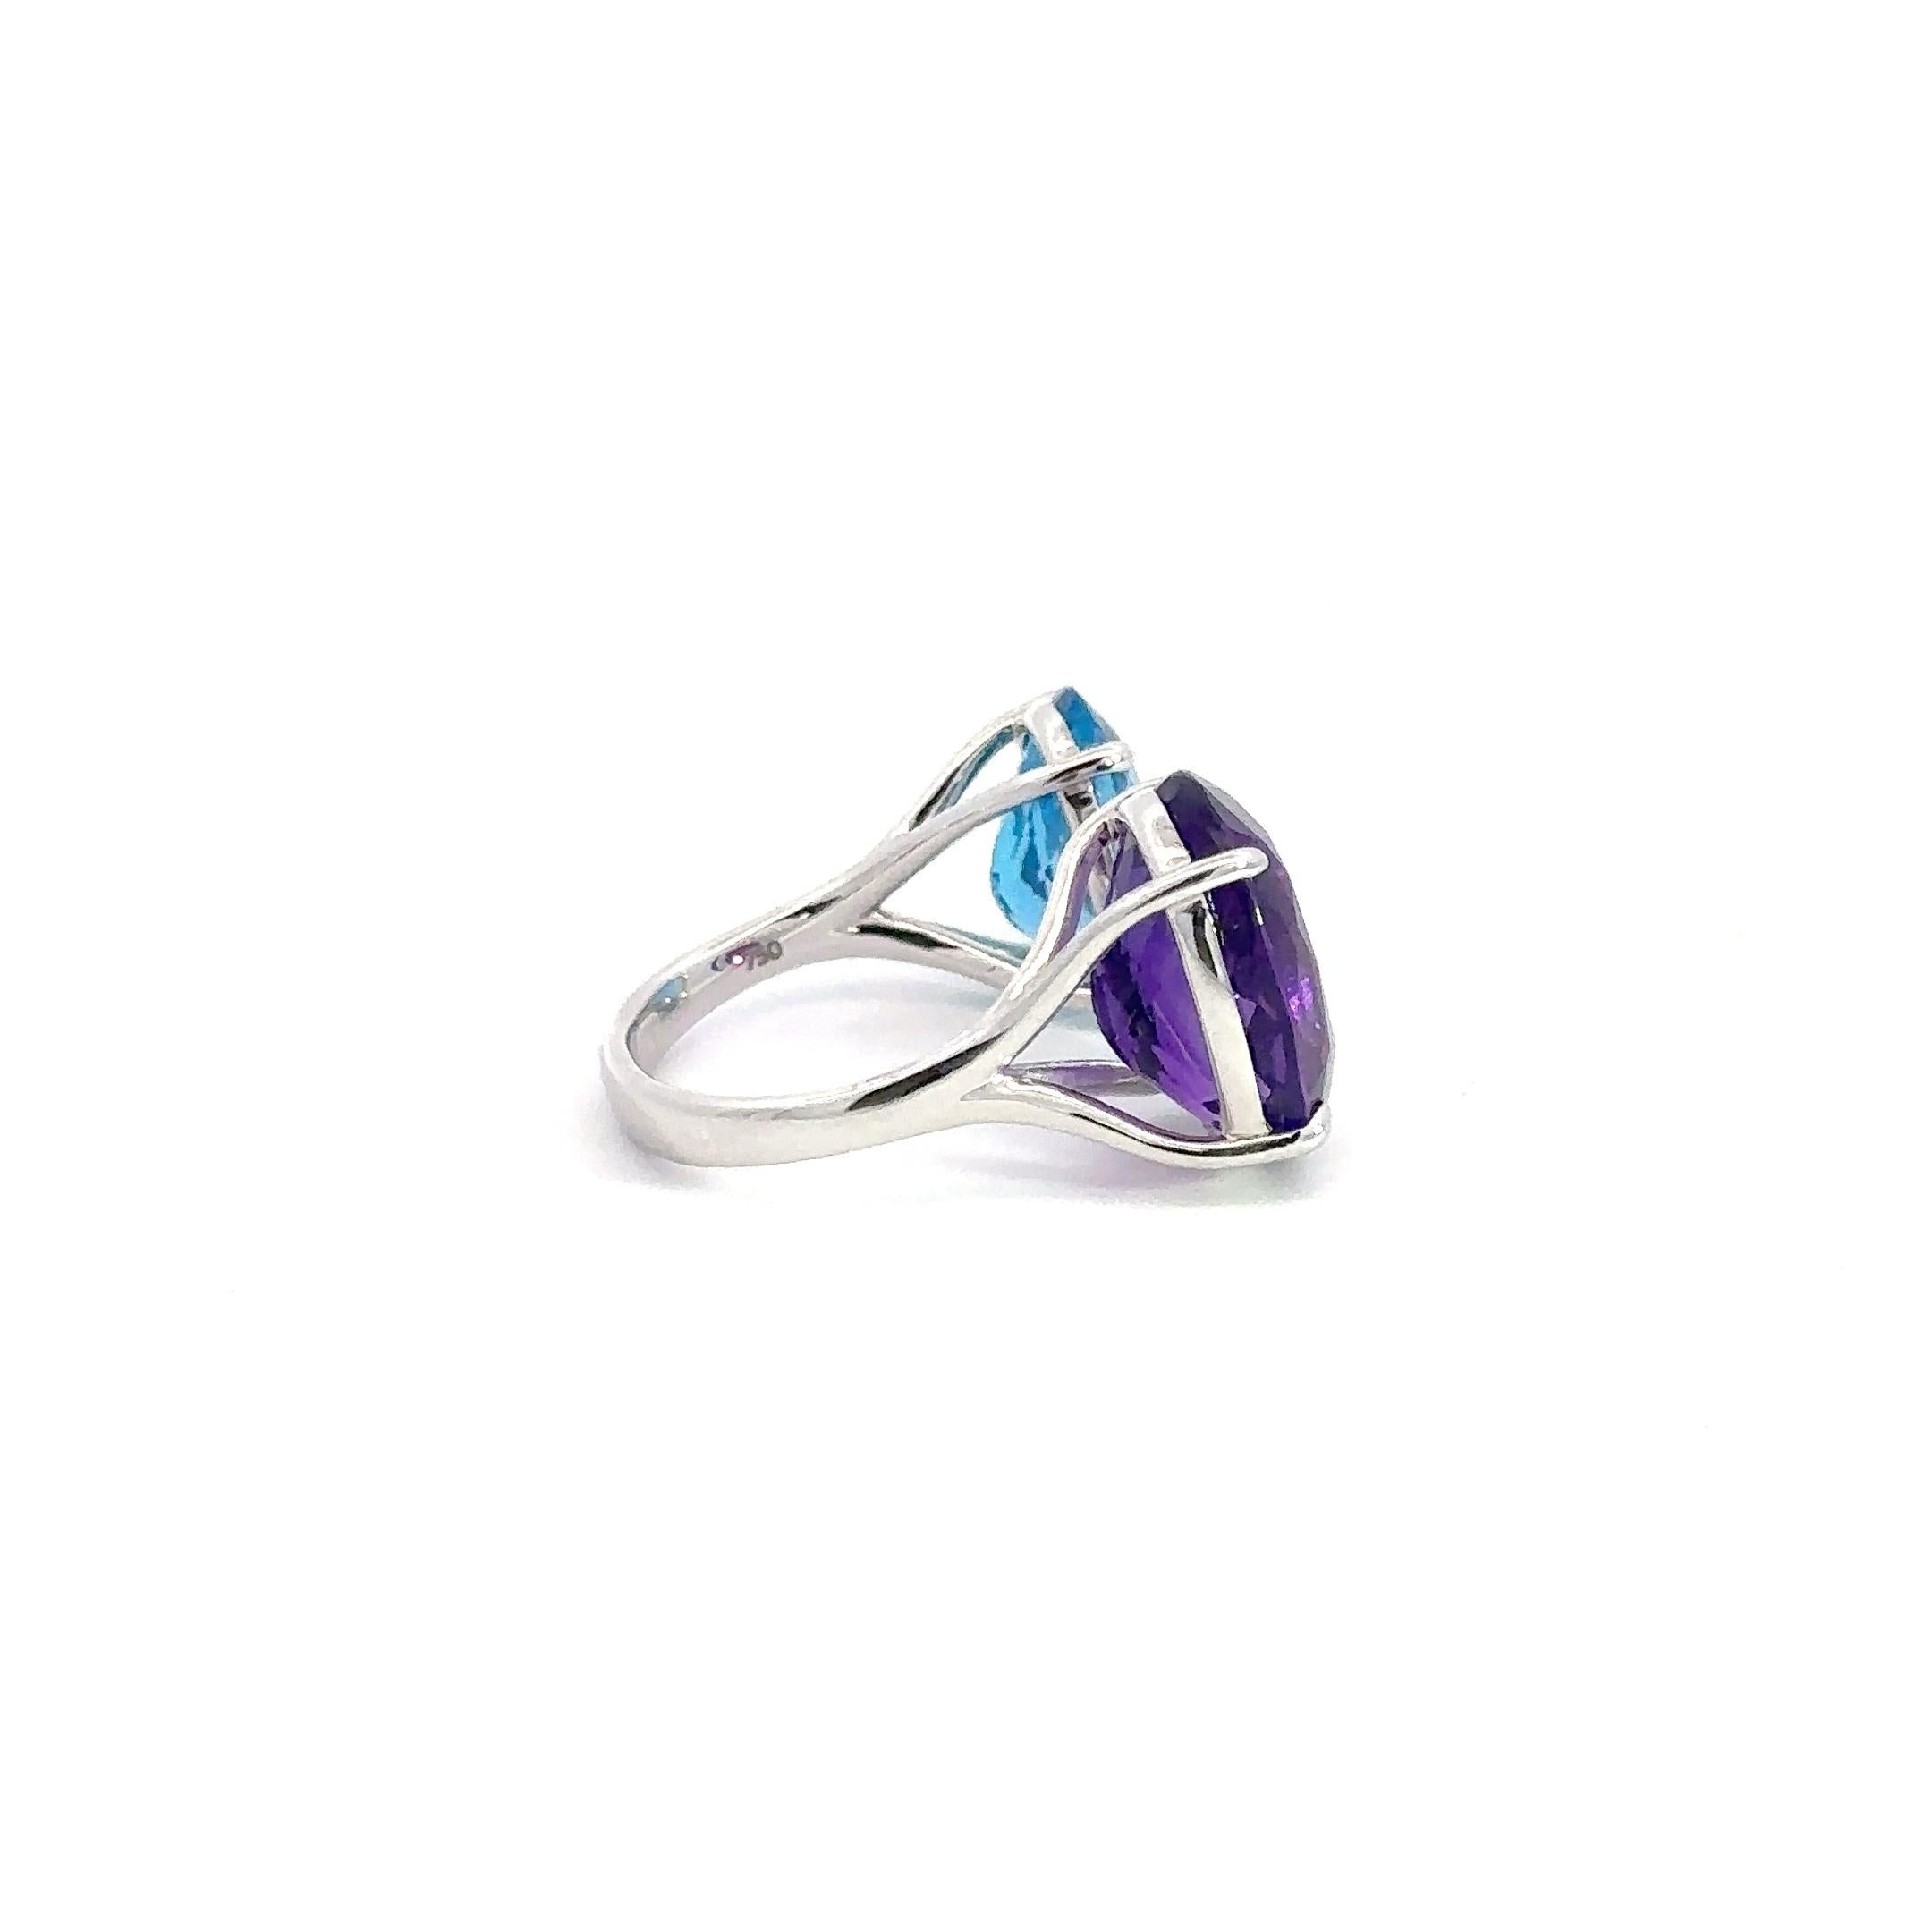 Ring

18K White Gold 

Weight 3,89 grams

Blue Topaz-1/4.79 Cts

Amethyst-1/6.91 Cts
Size-52

Discover the allure of our stunning 2 Oval Stone Ring, designed to elegantly embrace the space between your fingers. Crafted from 18K White Gold and